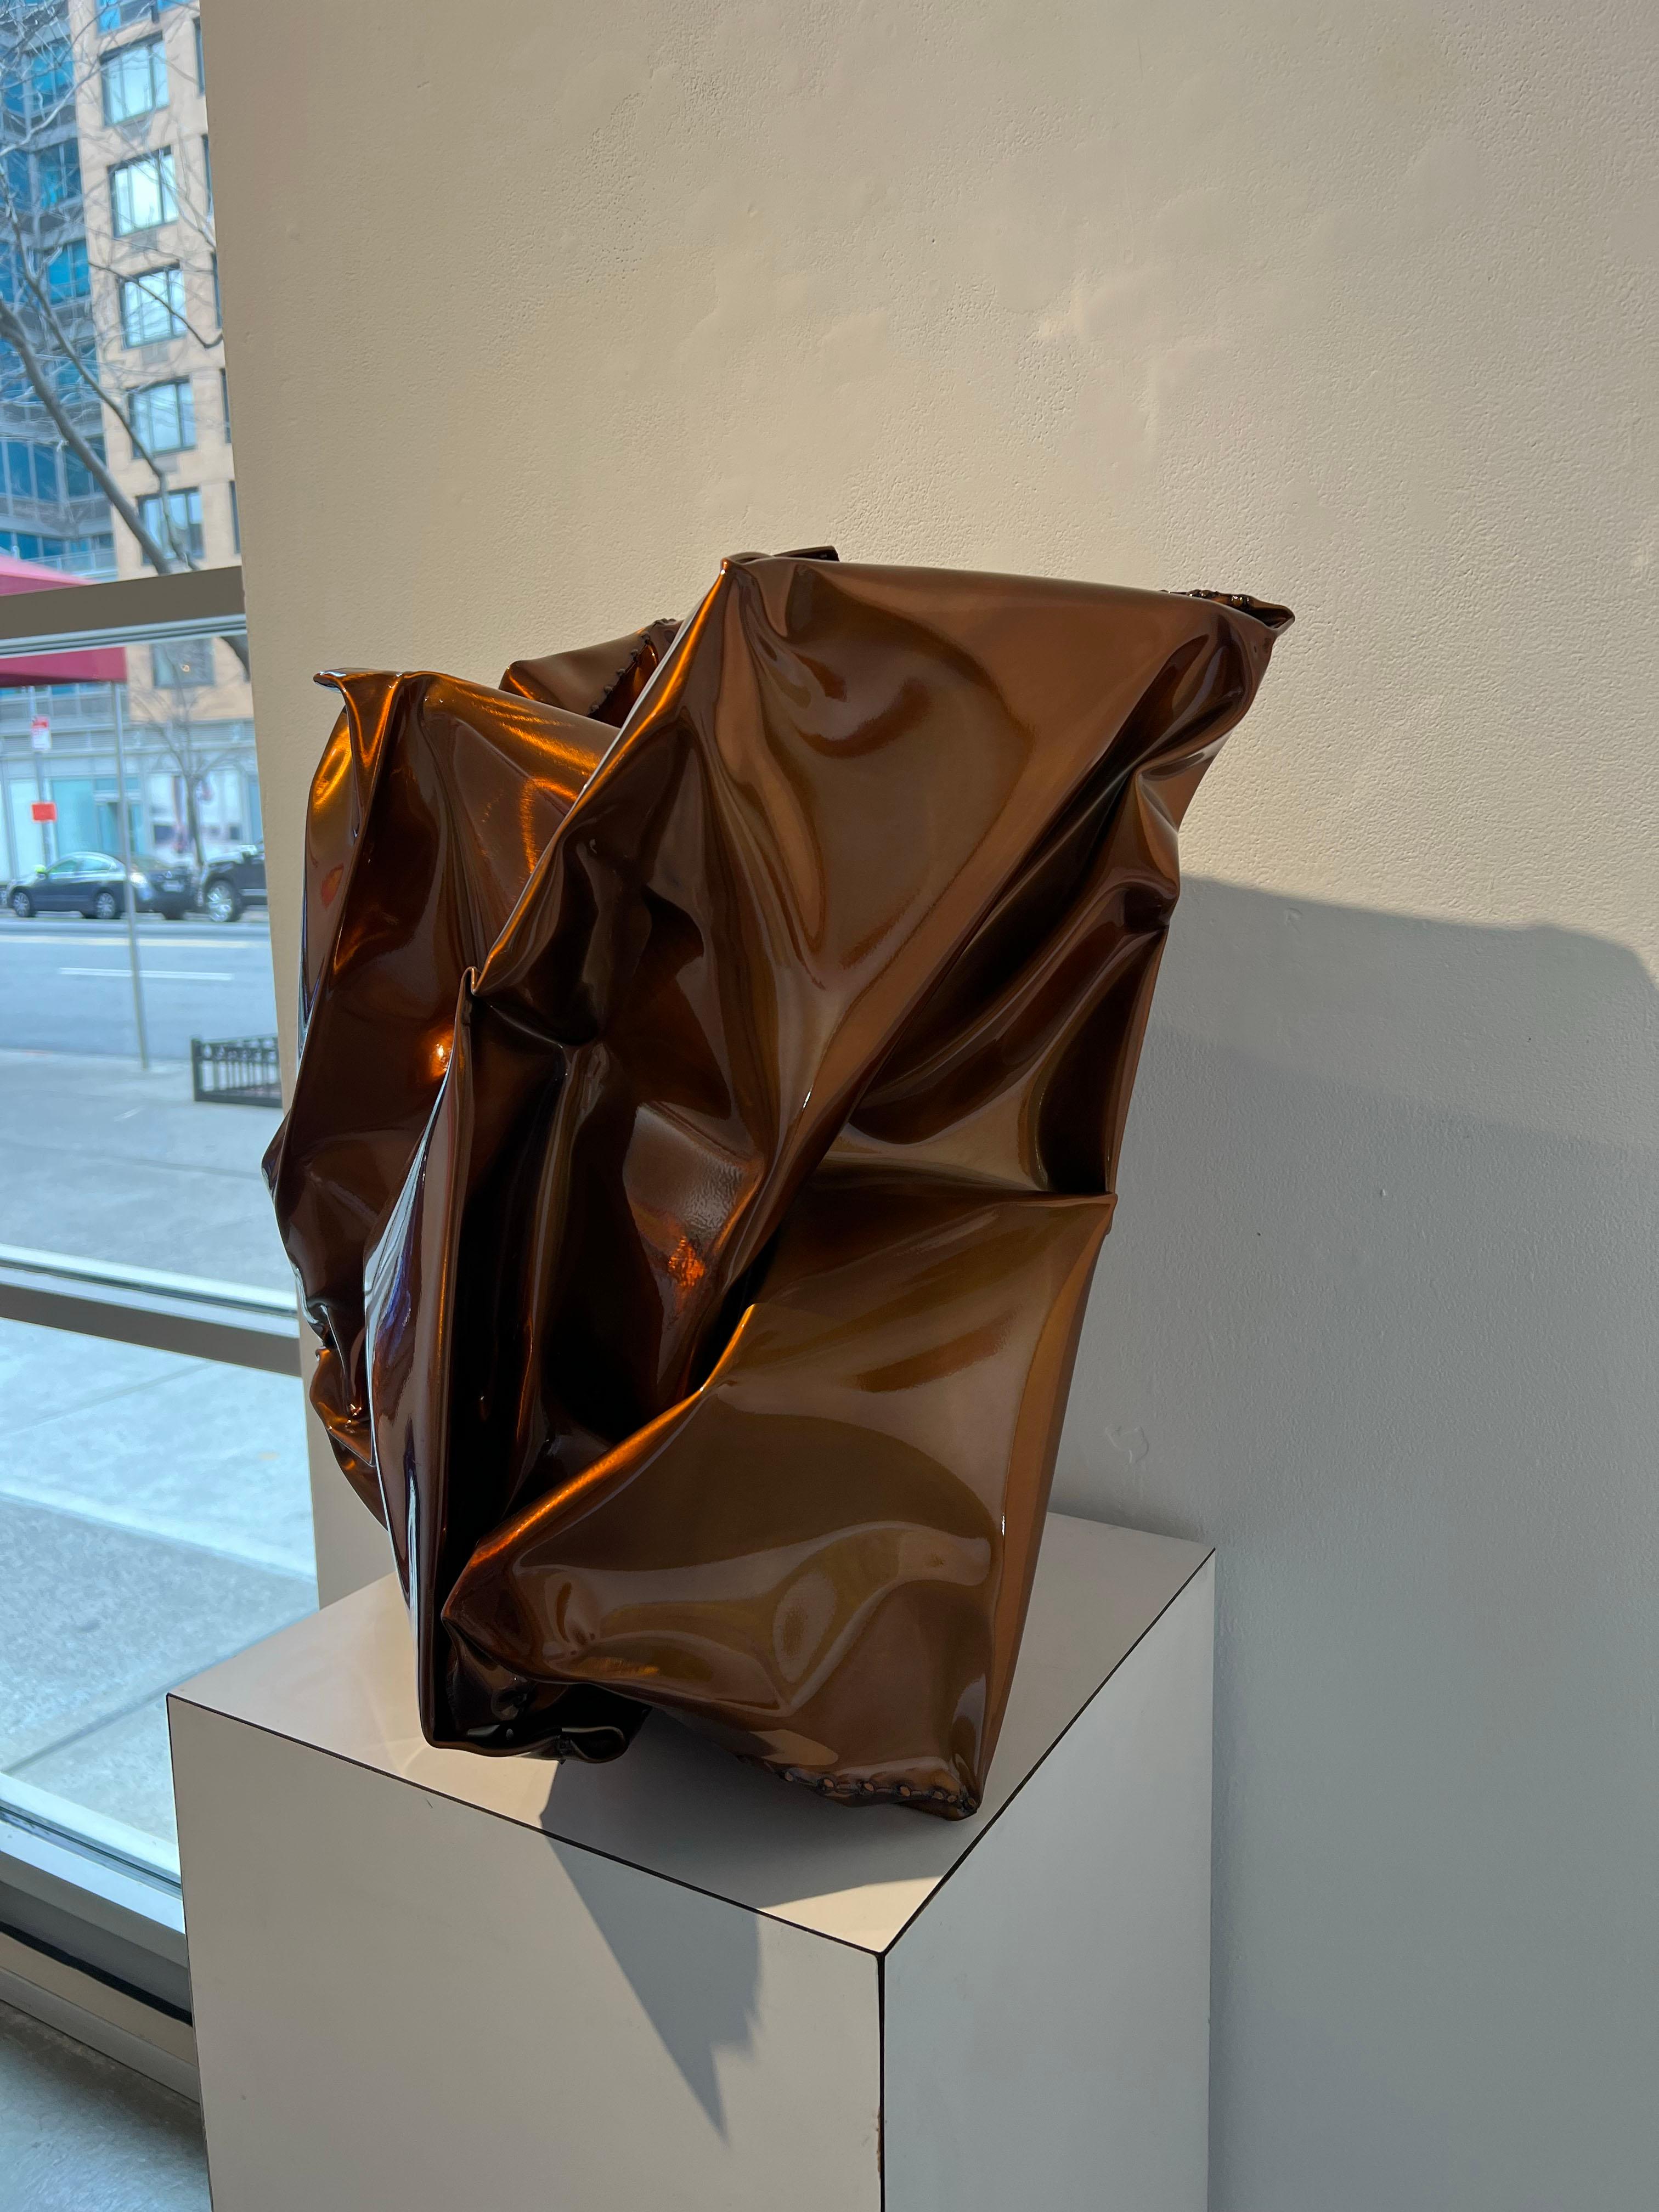 An outdoor sculpture molded with powder coated stainless steel. This sculpture is an rich, vibrant, and shiny brown. 

Rick Lazes is a three dimensional artist who works in a variety of media including wood, plaster, stainless steel, glass,